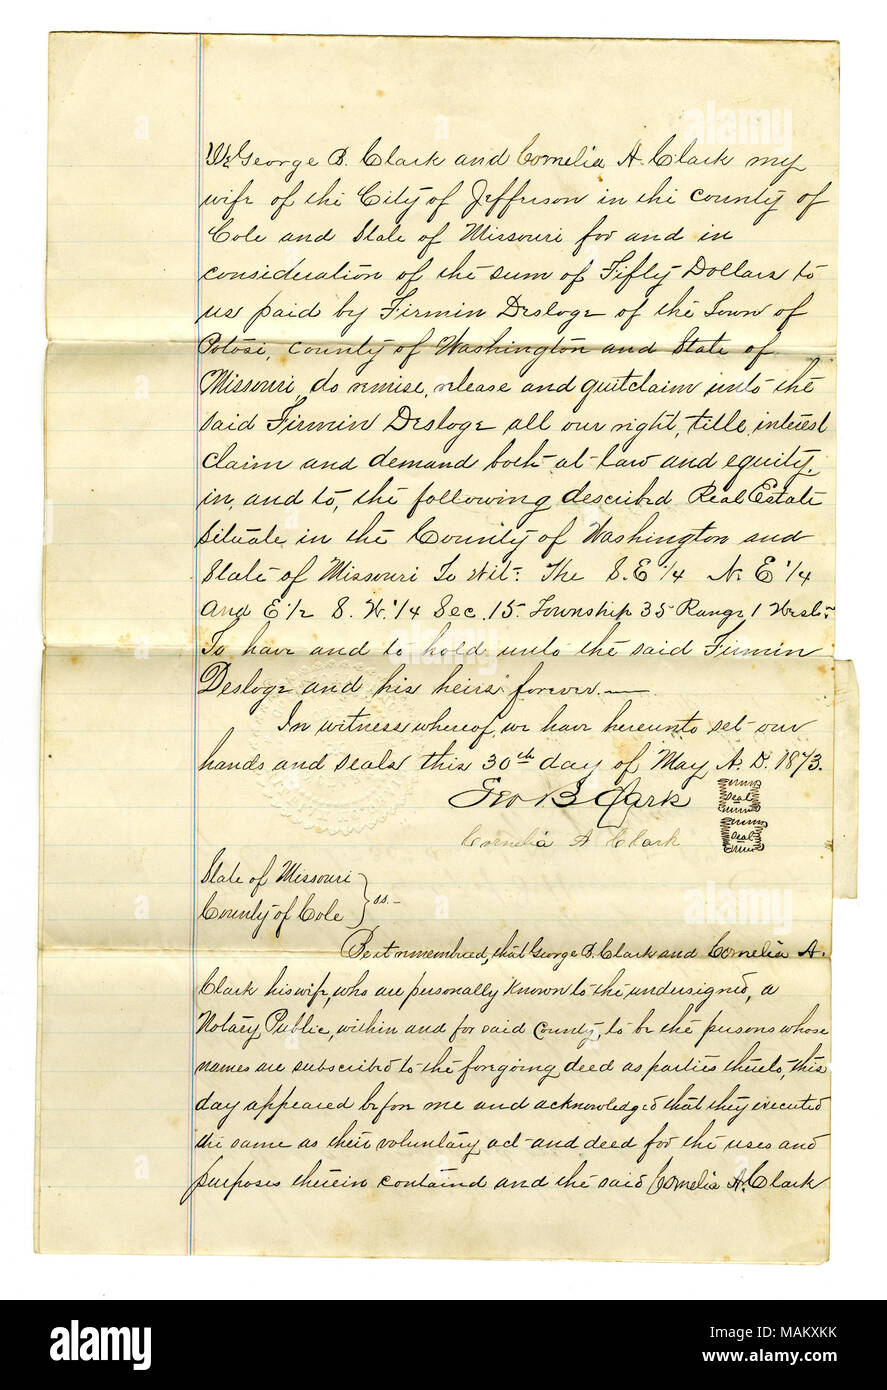 Purchase of land by Firmin Desloge from George B. Clark, and wife Cornelia A. Clark (of Jefferson City), for the sum of $50. Property transferred: The SE 1/4 NE 1/4 and E 1/2 SW 1.4 Section 15, Range 1 West in Washington County. Title: Deed signed George B. Clark and Cornelia A. Clark, Jefferson City, May 30, 1873  . 30 May 1873. Clark, George B. Stock Photo